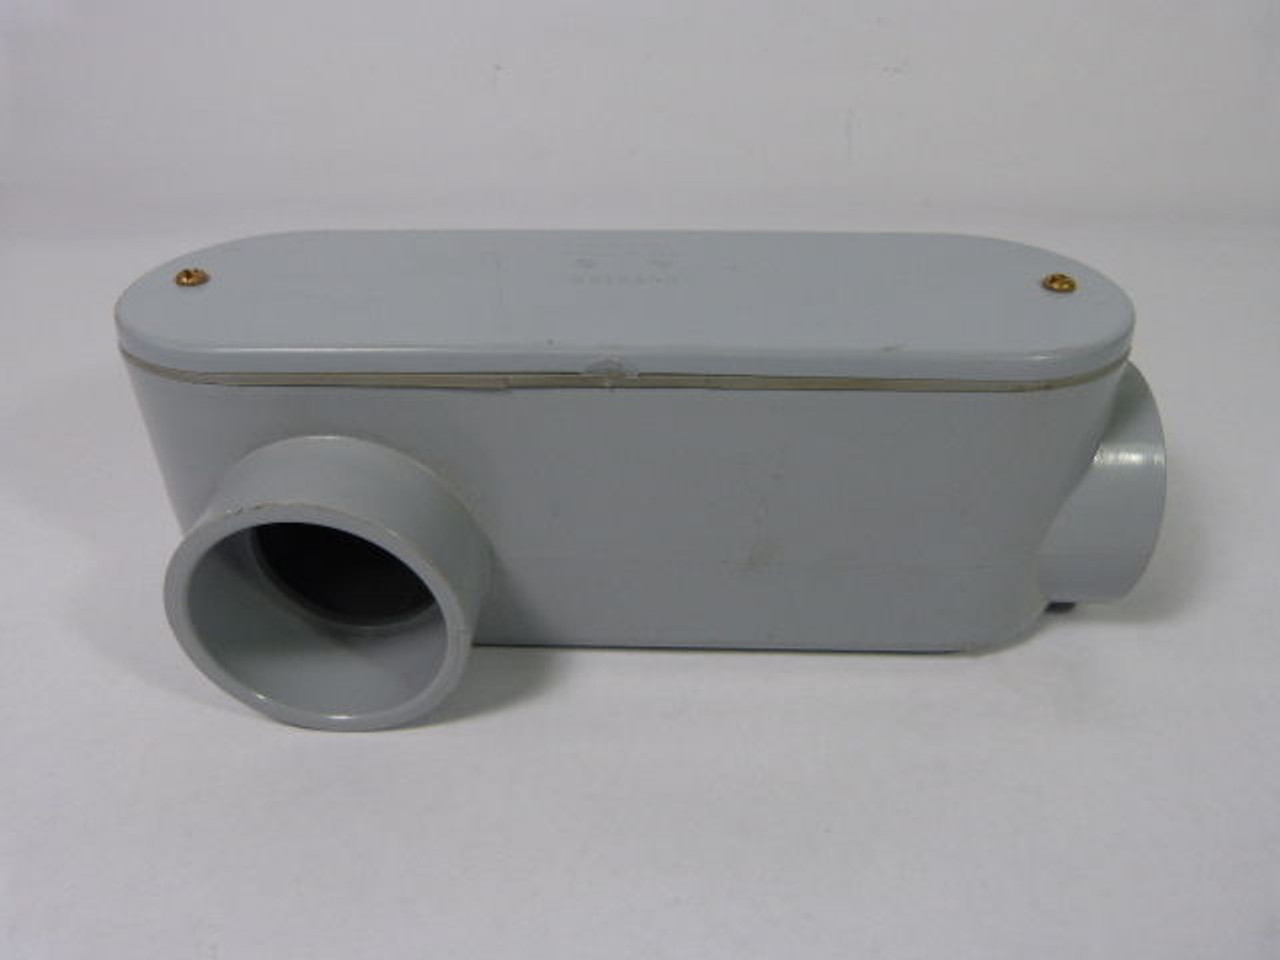 Scepter SLR-60S Conduit Body with Cover 2" NOP